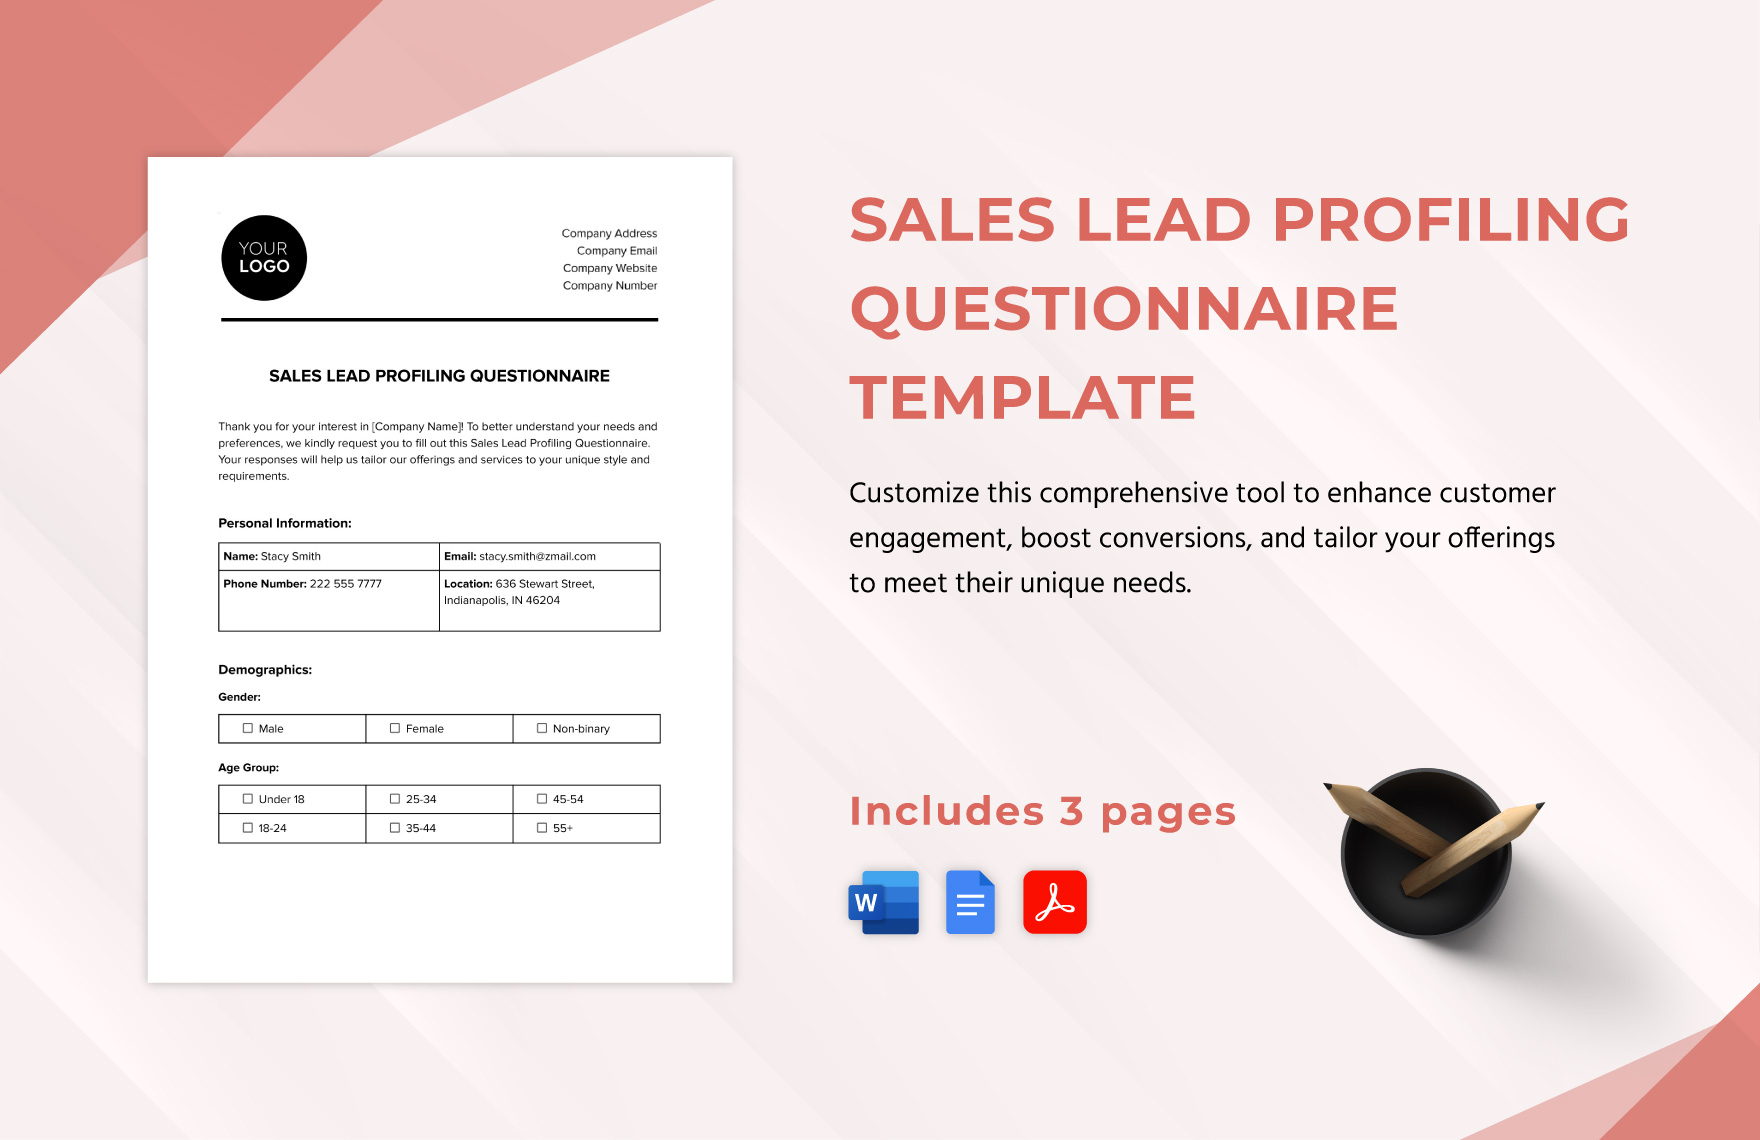 Sales Lead Profiling Questionnaire Template in Word, Google Docs, PDF